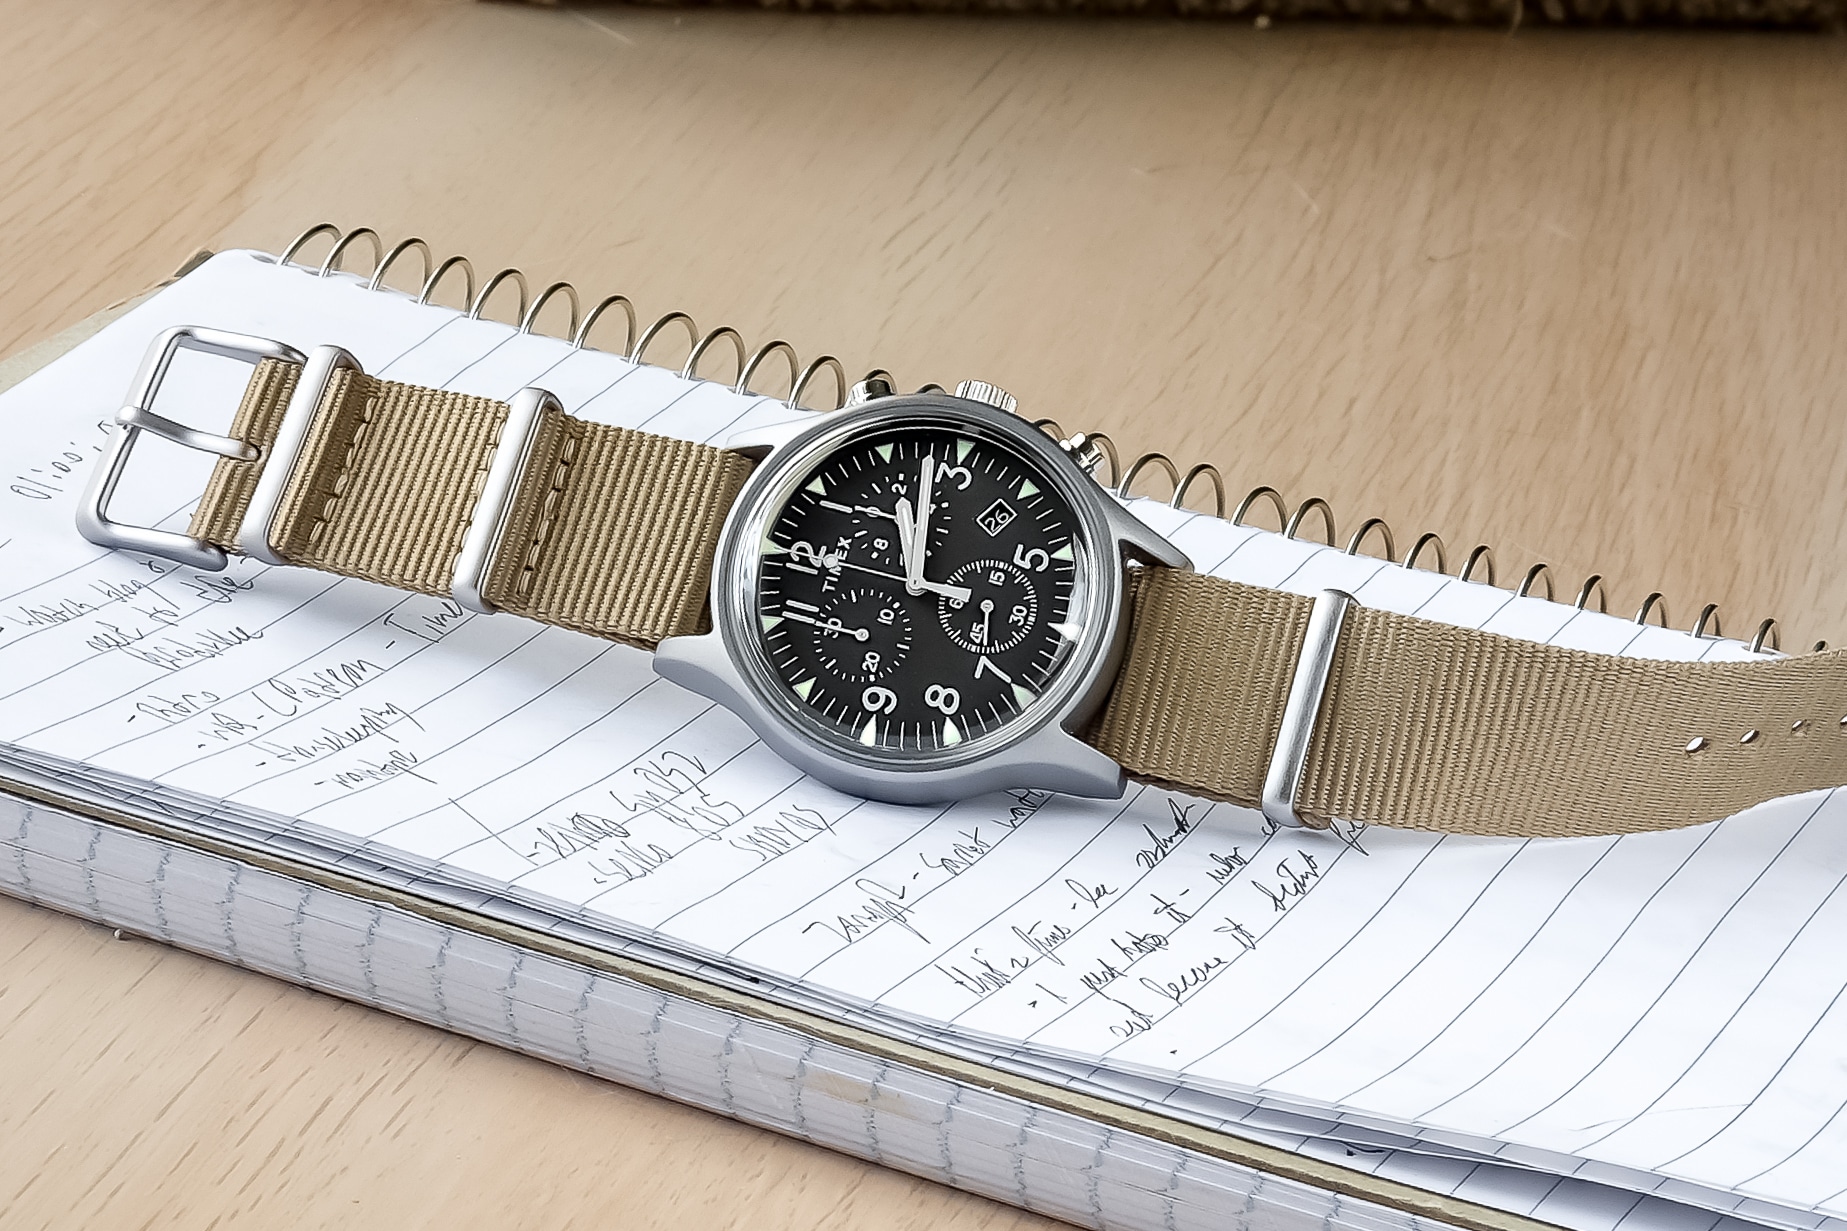 Timex Watches: History, Reviews, and Everything You Need To Know